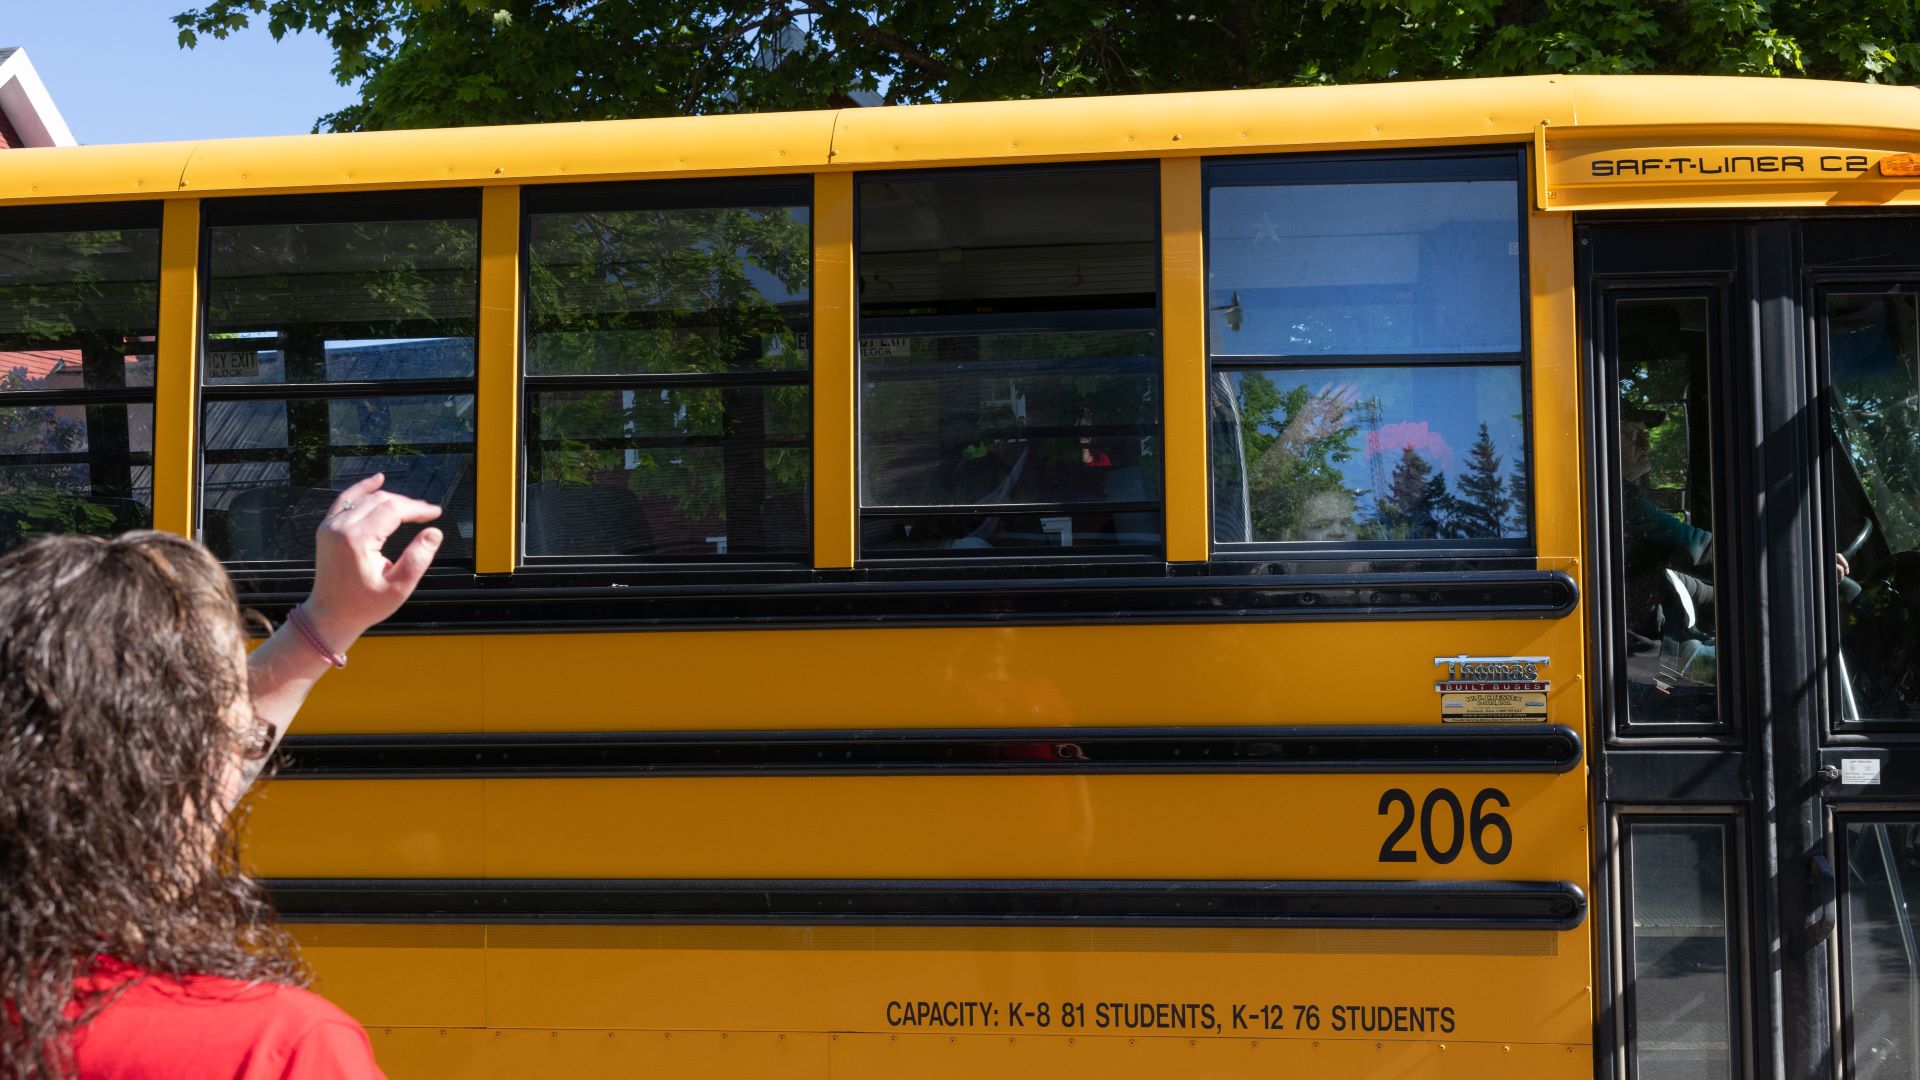 A mother waves goodbye to her daughter who is looking through the window of a school bus.